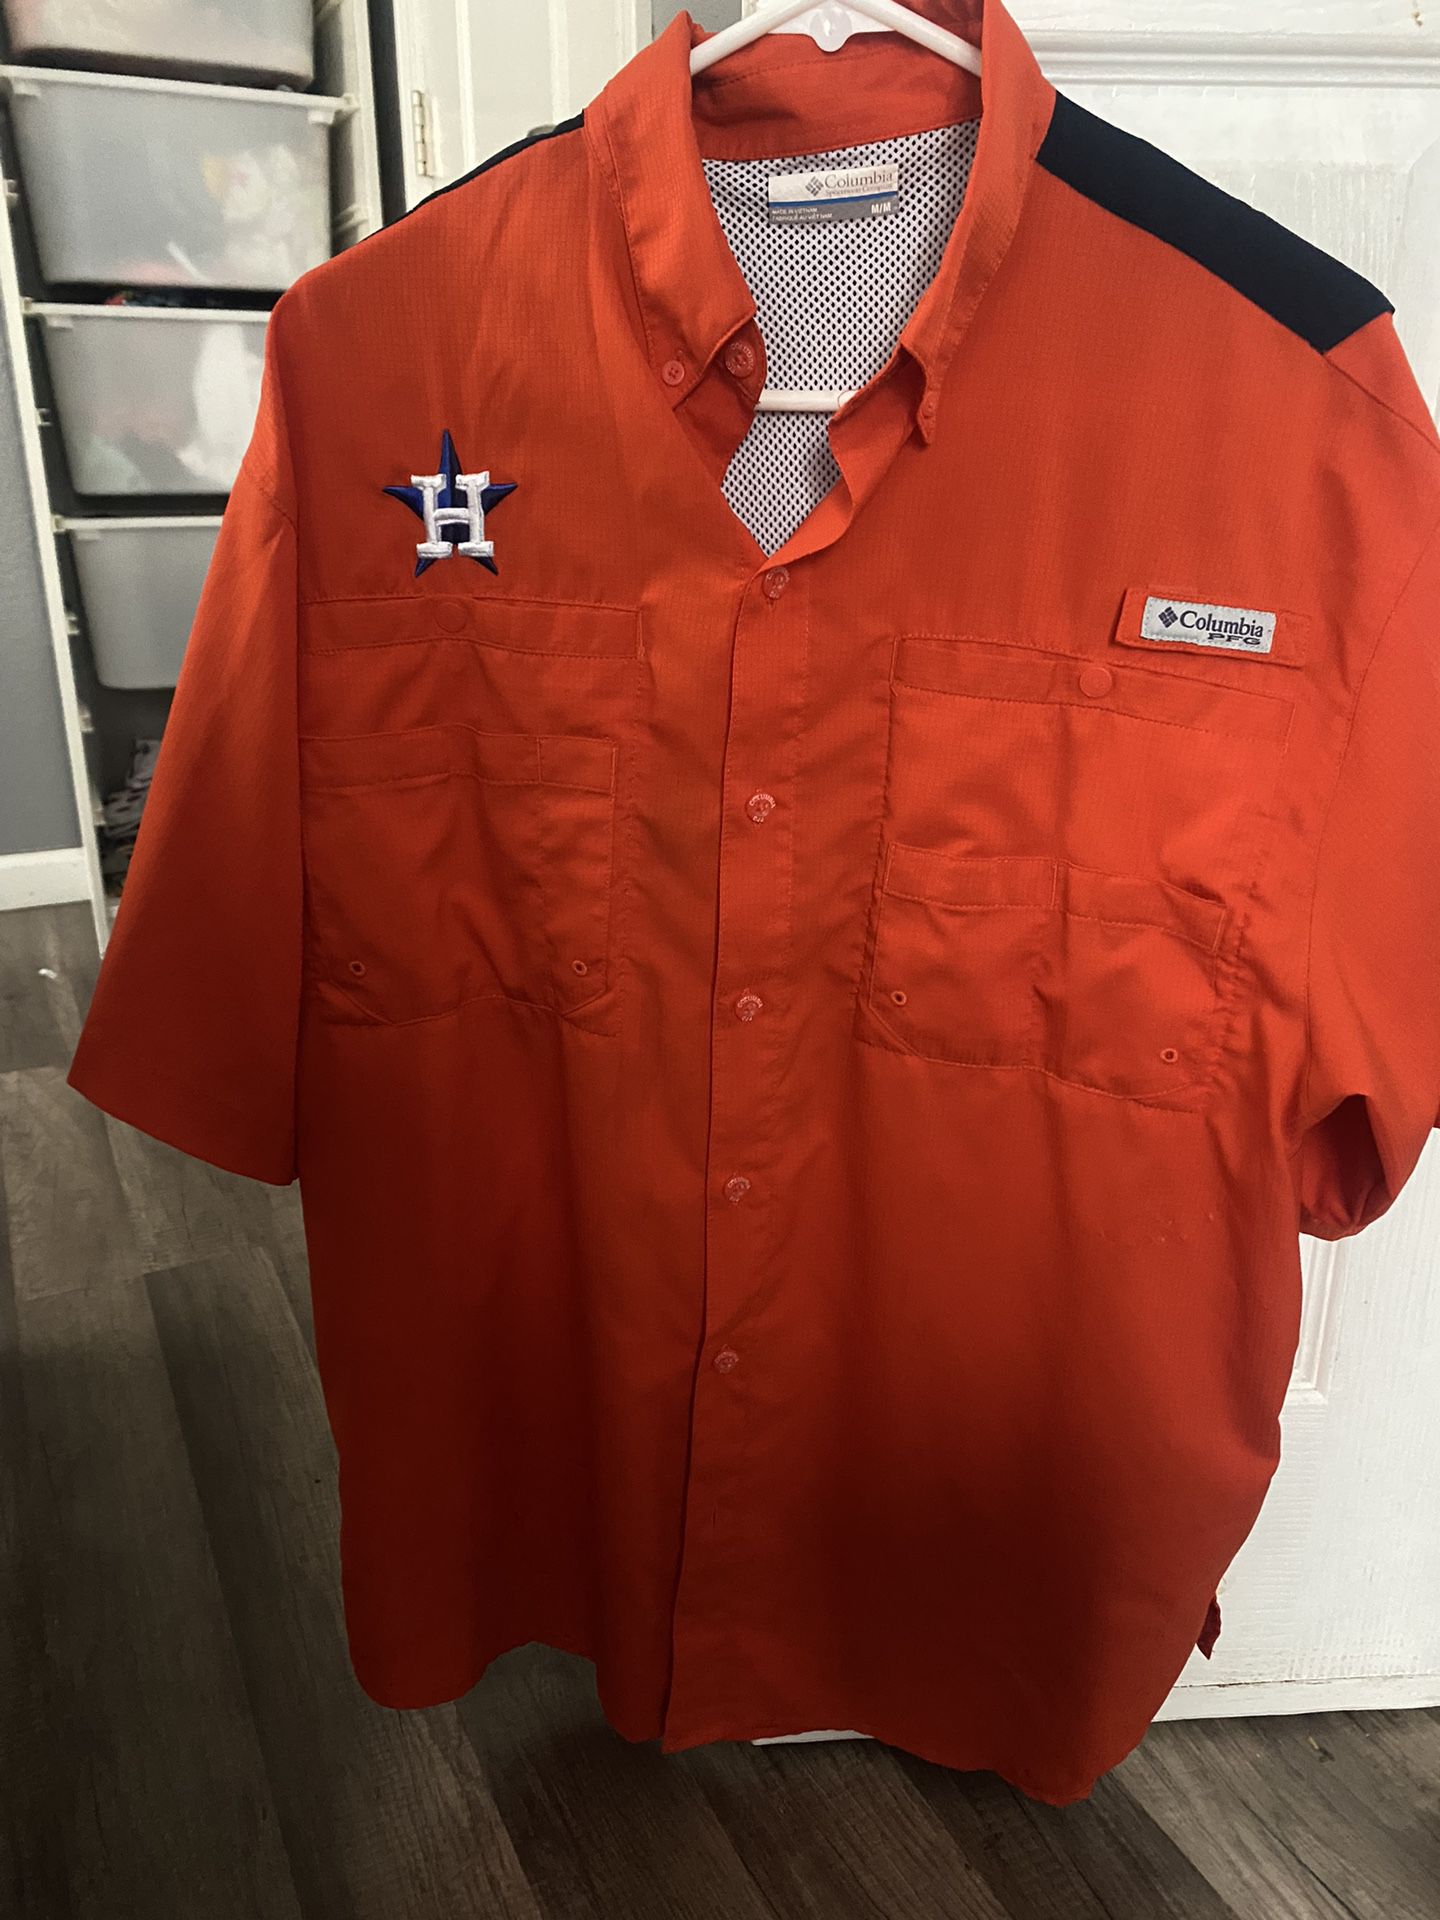 Tommy Bahama Baseball Astros Shirt for Sale in Garland, TX - OfferUp